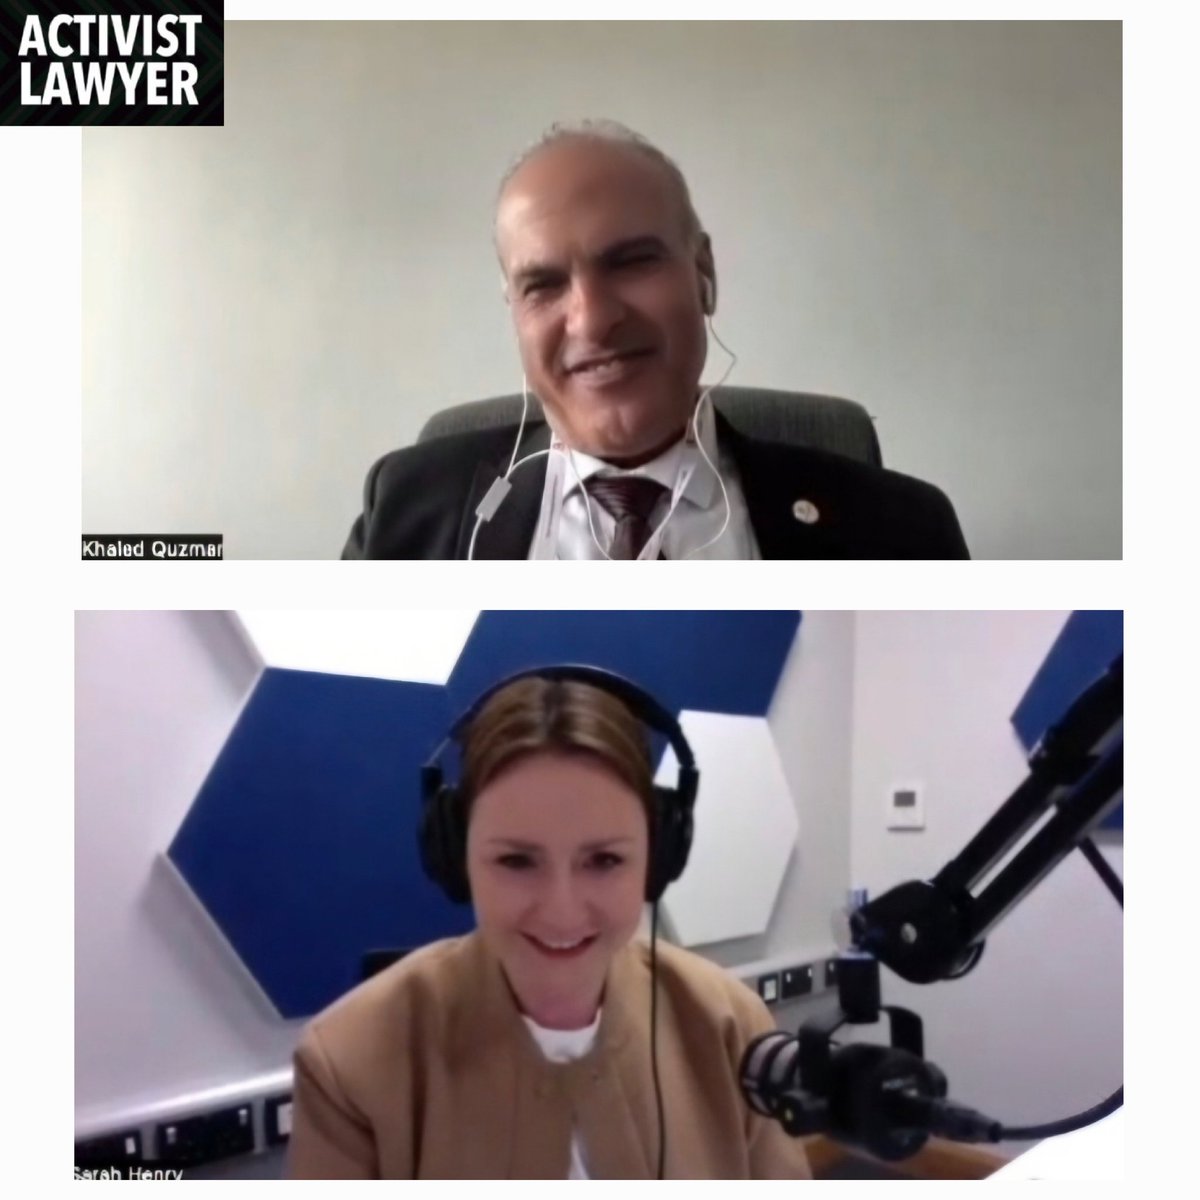 The next guest on @activistlawyer_ is Khaled Quzmar, human rights lawyer and Director General @DCIPalestine - an honour and privilege to interview him about his work, particularly in such unprecedented and extremely challenging times. Coming soon...